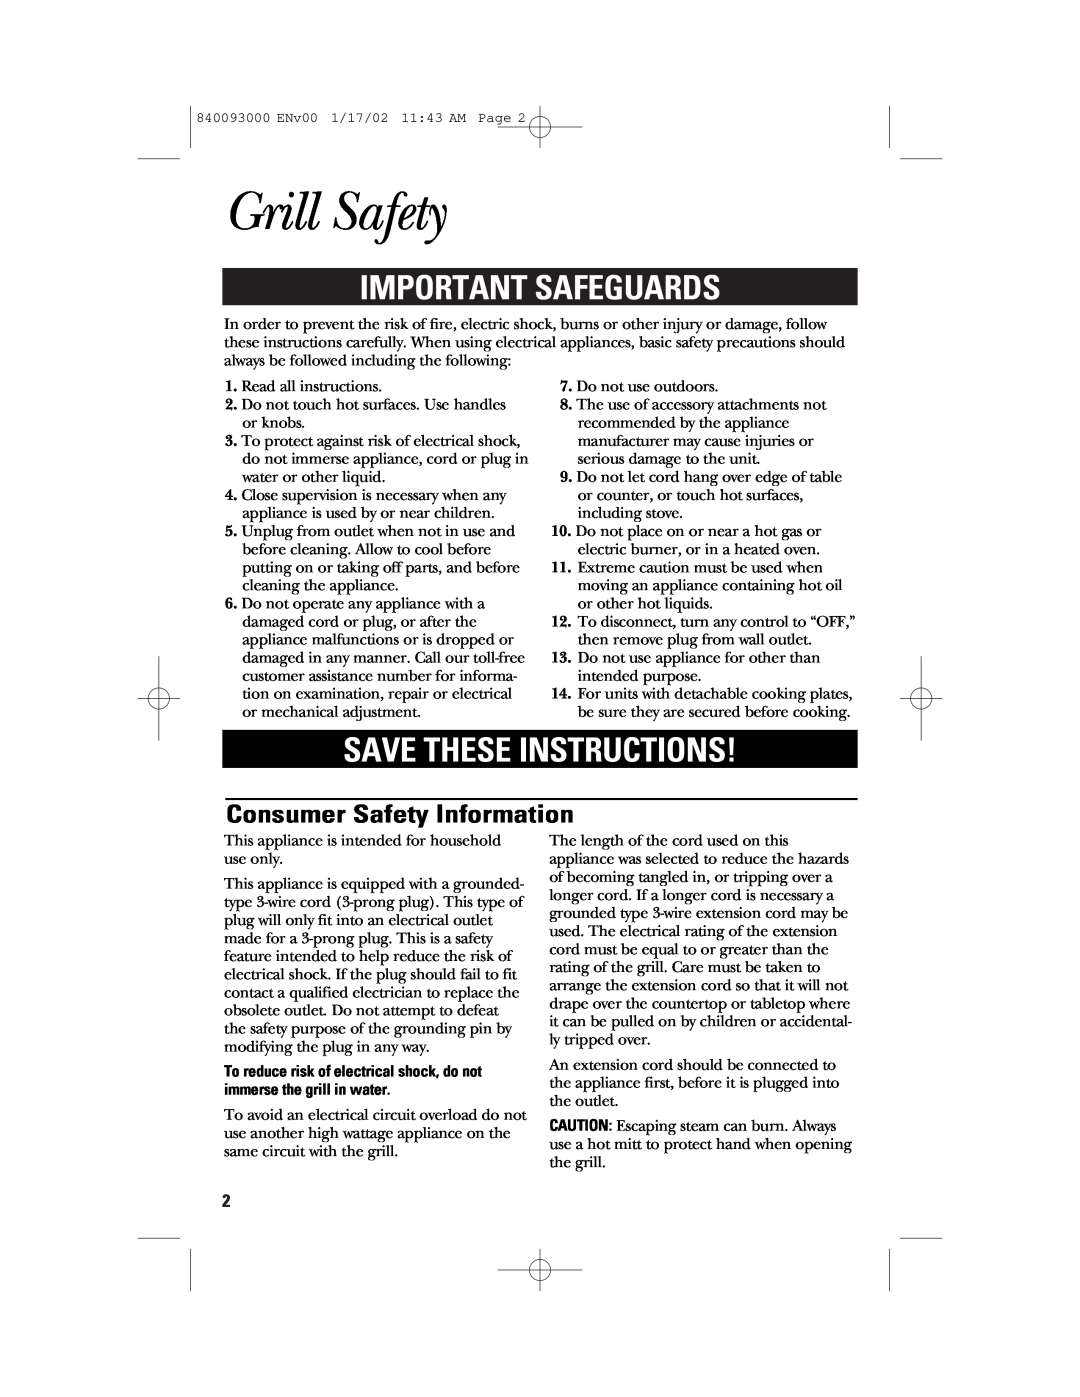 GE 840093000, 106668 manual Grill Safety, Important Safeguards, Save These Instructions, Consumer Safety Information 